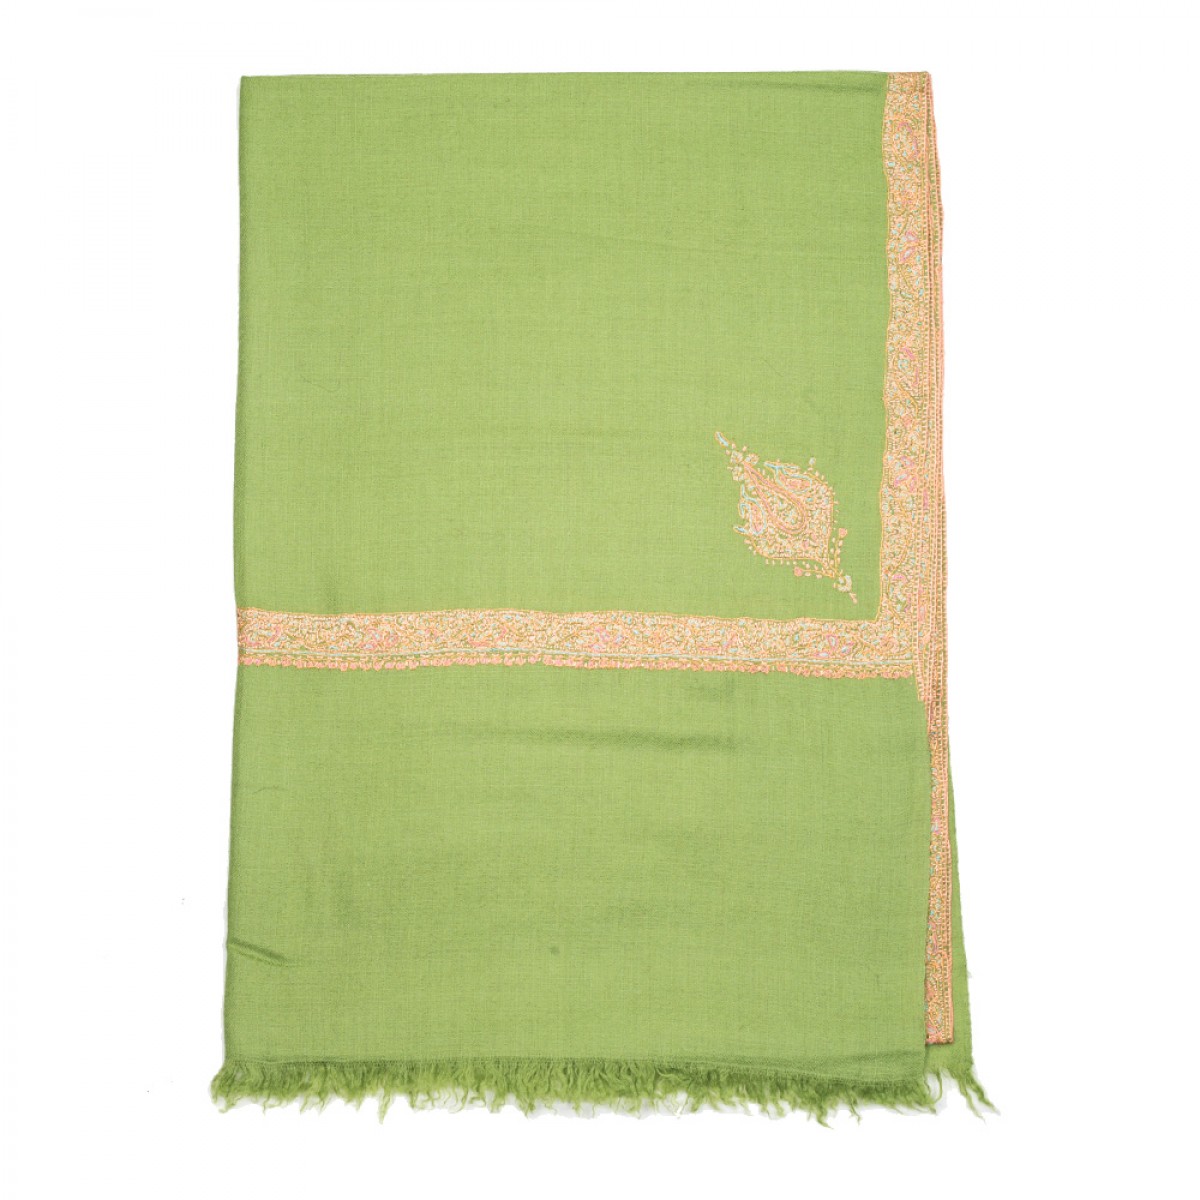 Embroidered Pashmina Stole - Green & Pink